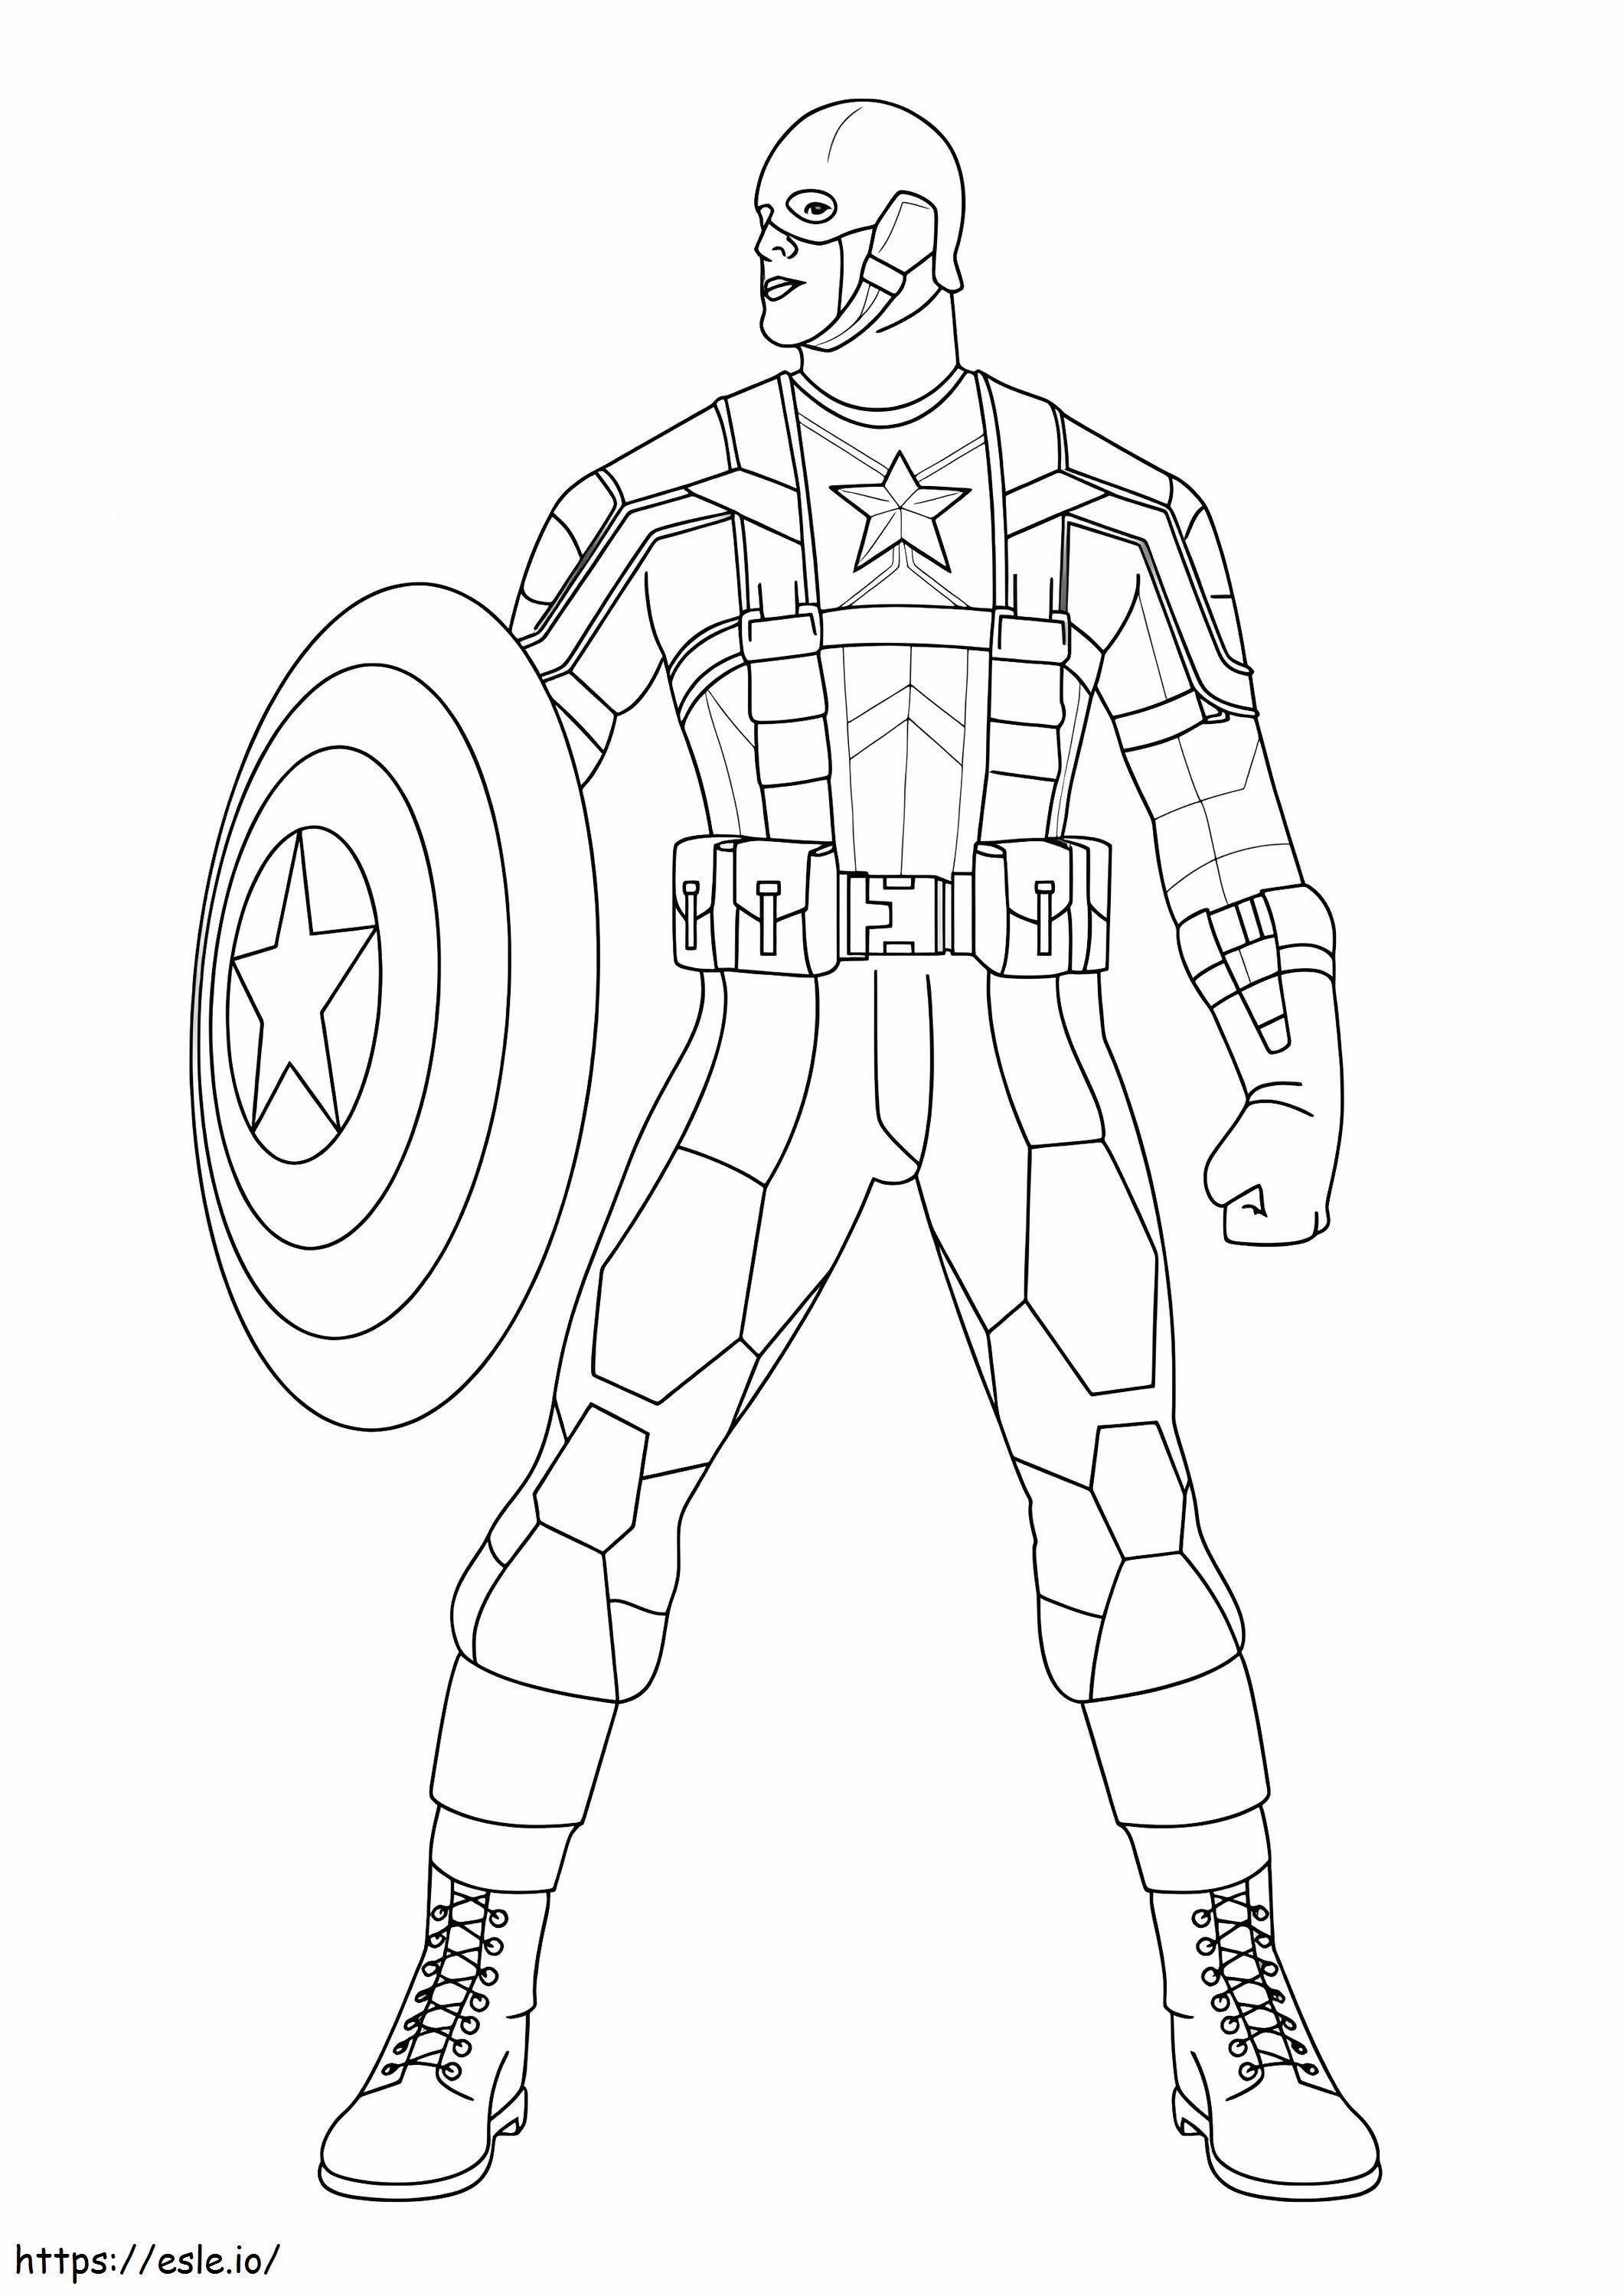 1526632290 A Captain America A4 coloring page